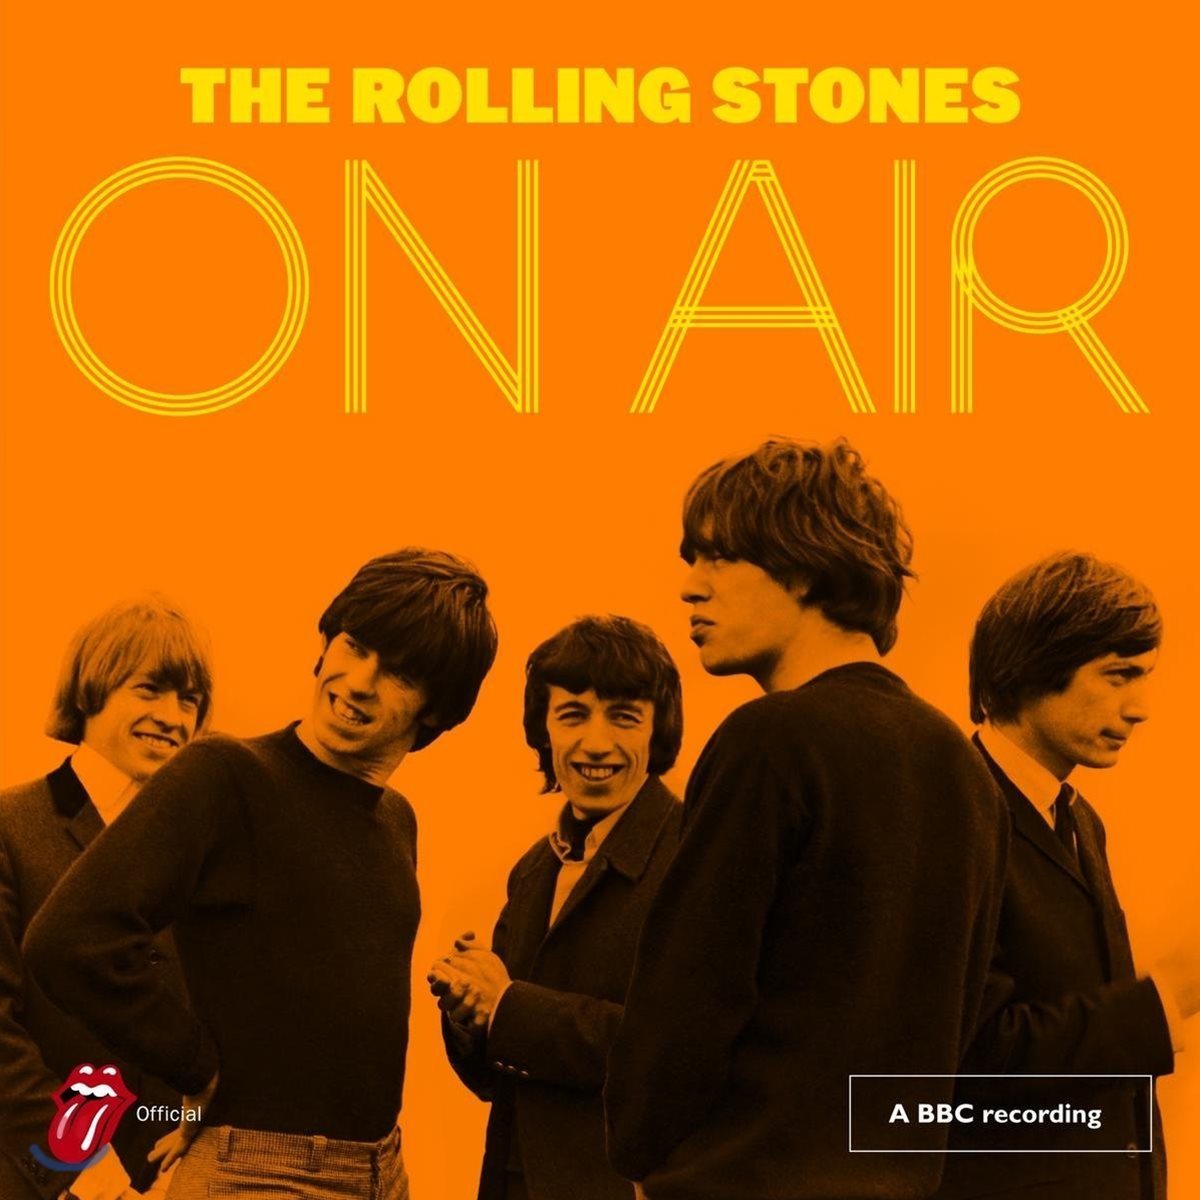 The Rolling Stones - On Air: A BBC Recording 롤링 스톤스 라이브 앨범 